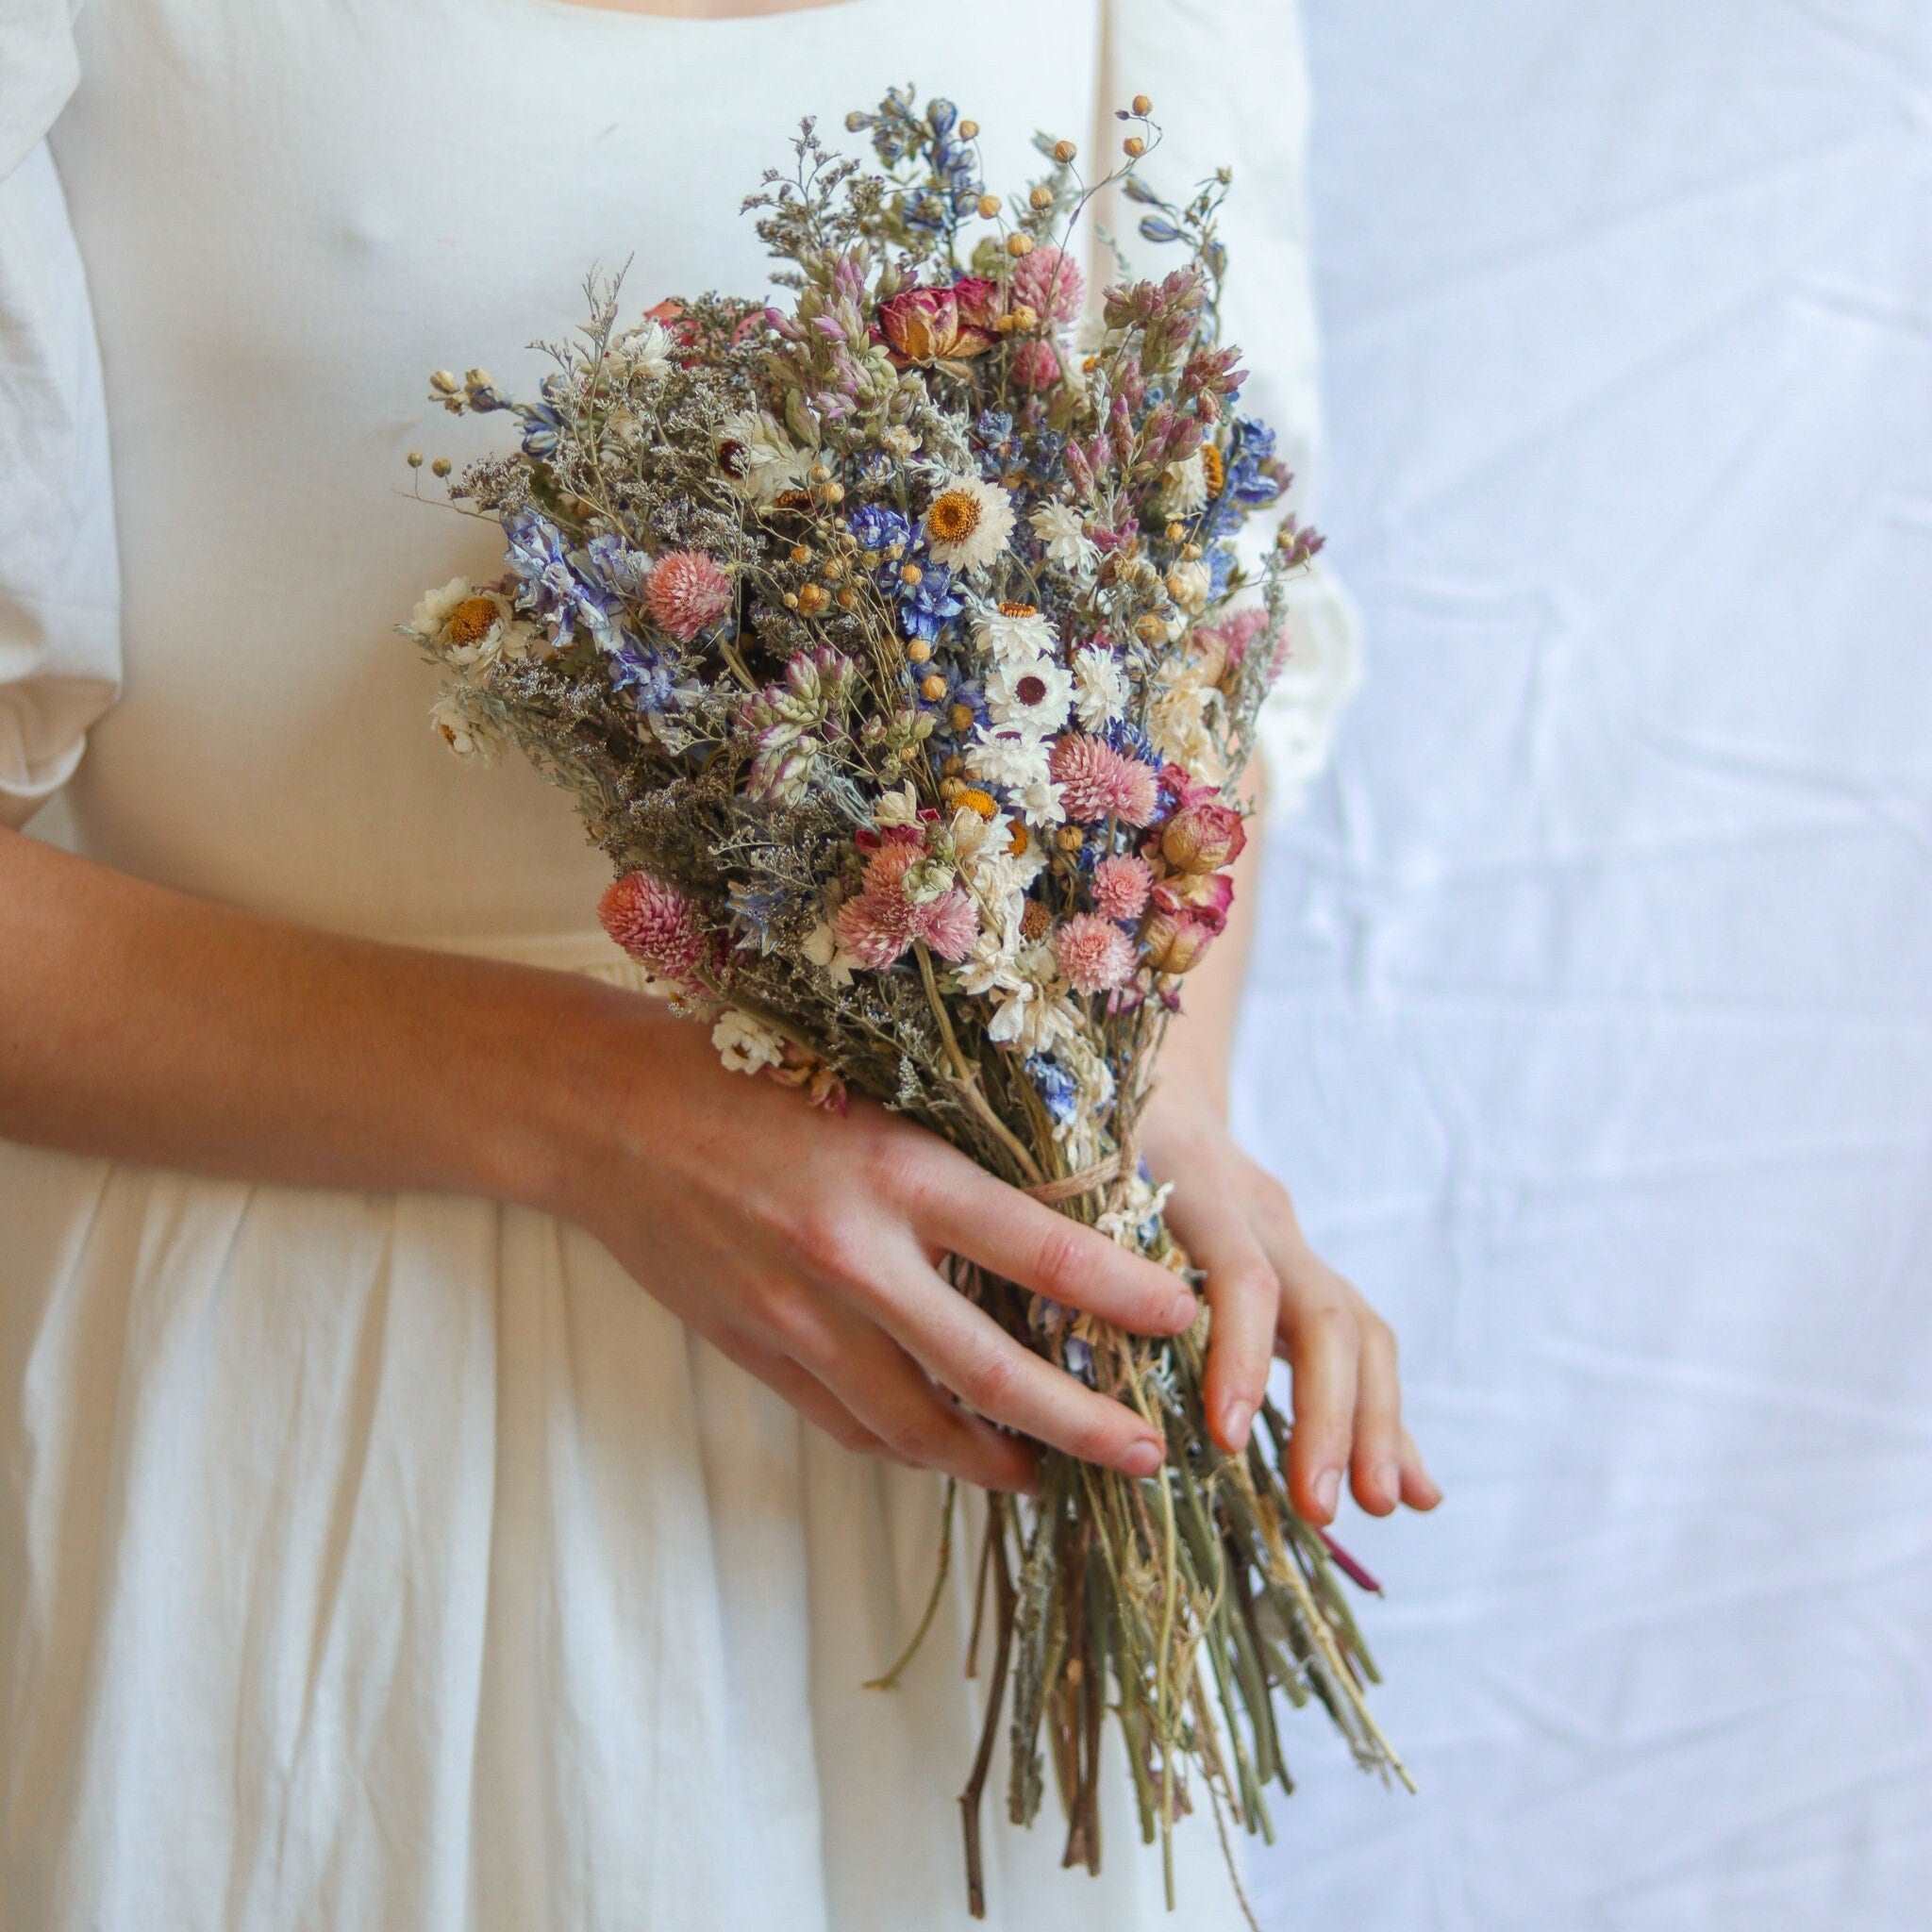 Small Dried Lavender Bouquet with Larkspur or Billy Balls